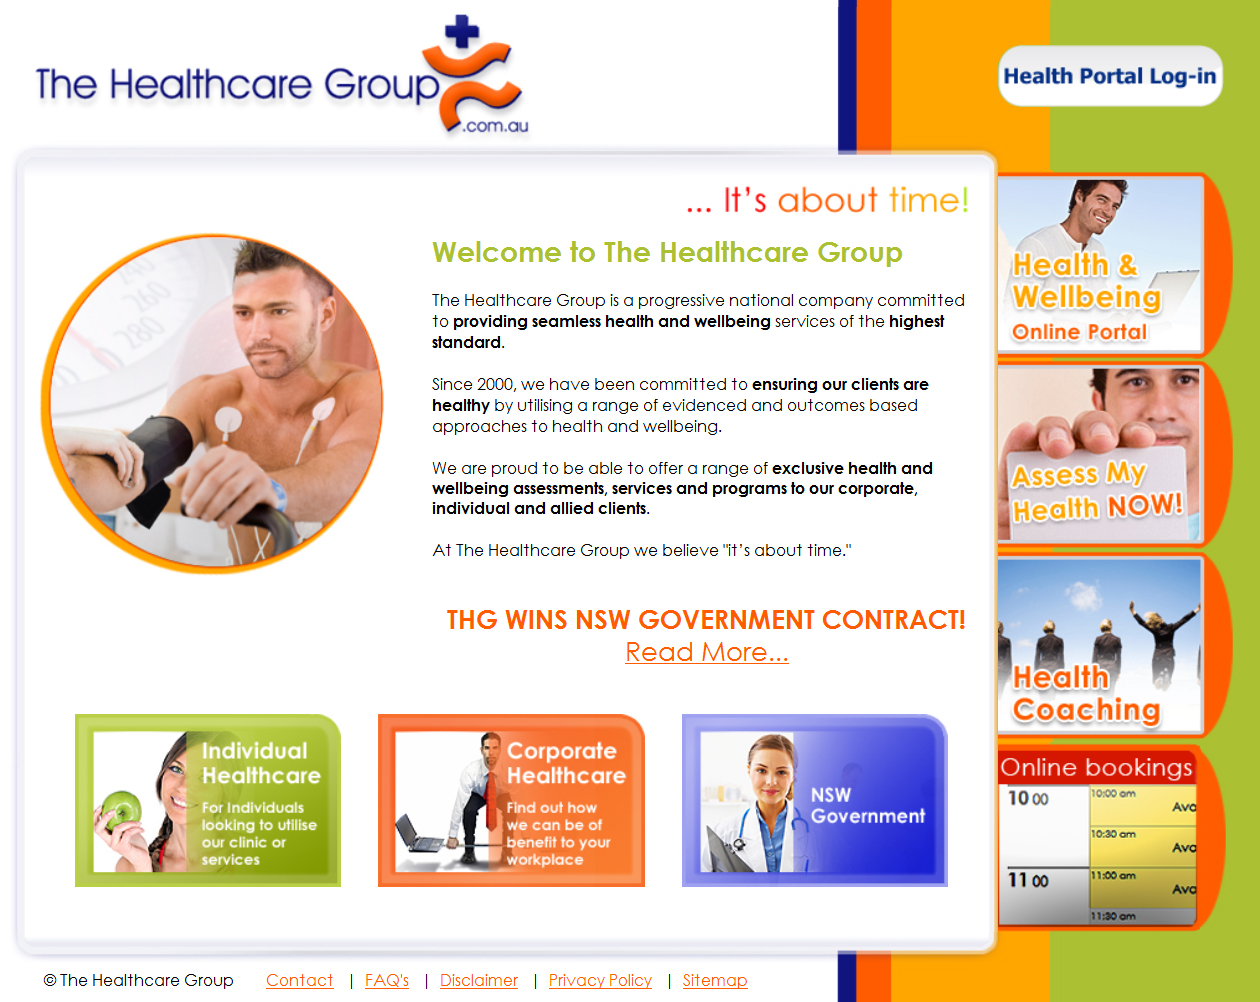 The Healthcare Group